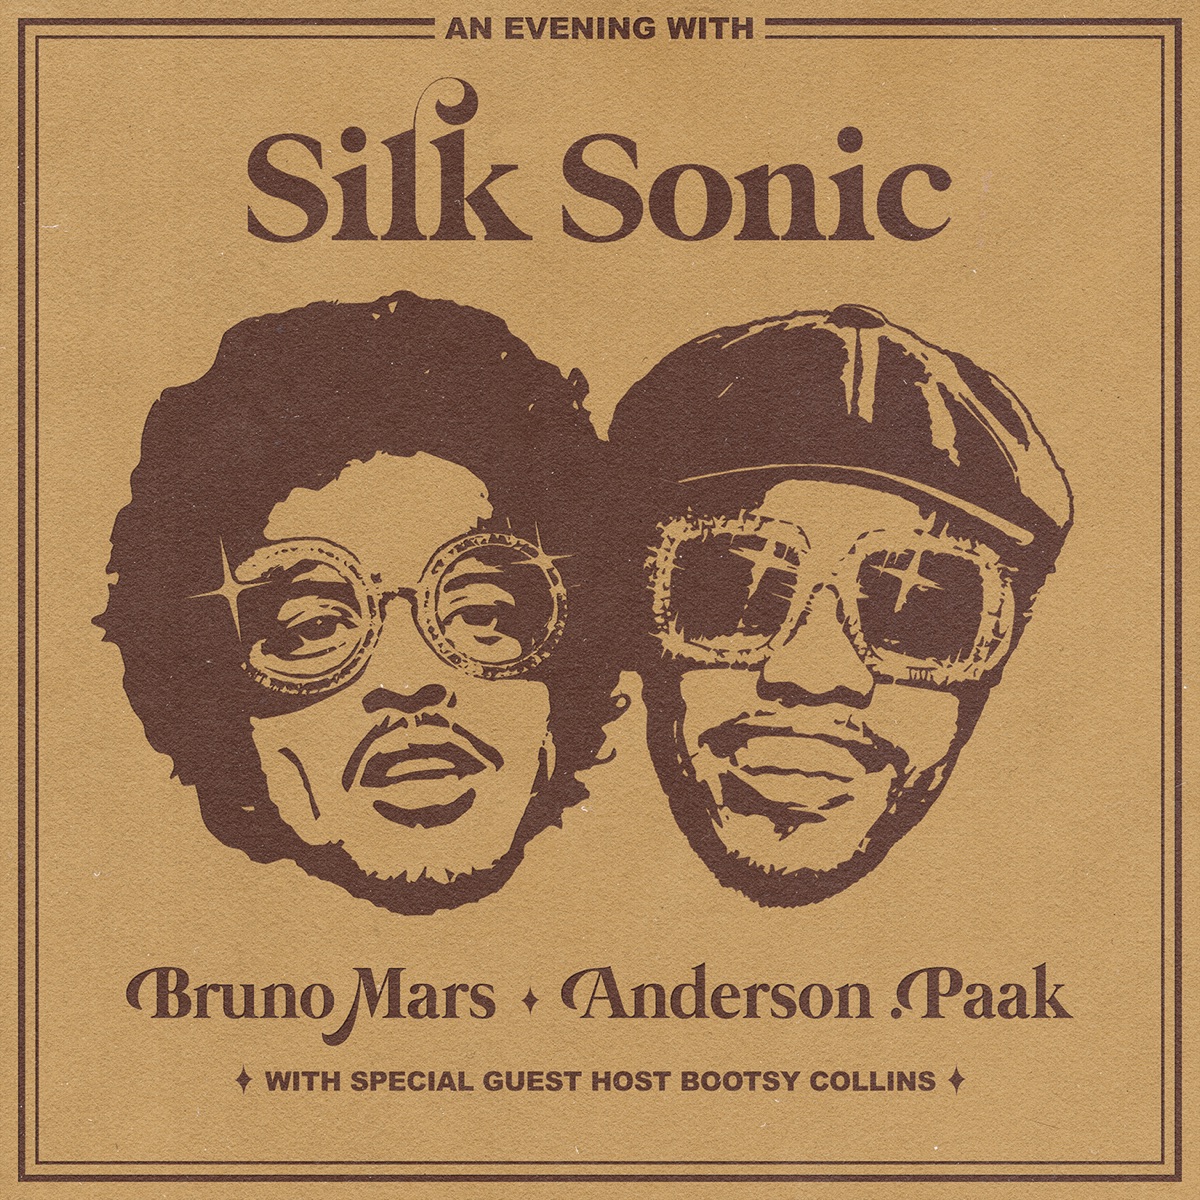 Cover for『Bruno Mars, Anderson .Paak, Silk Sonic - Blast Off』from the release『An Evening With Silk Sonic 』